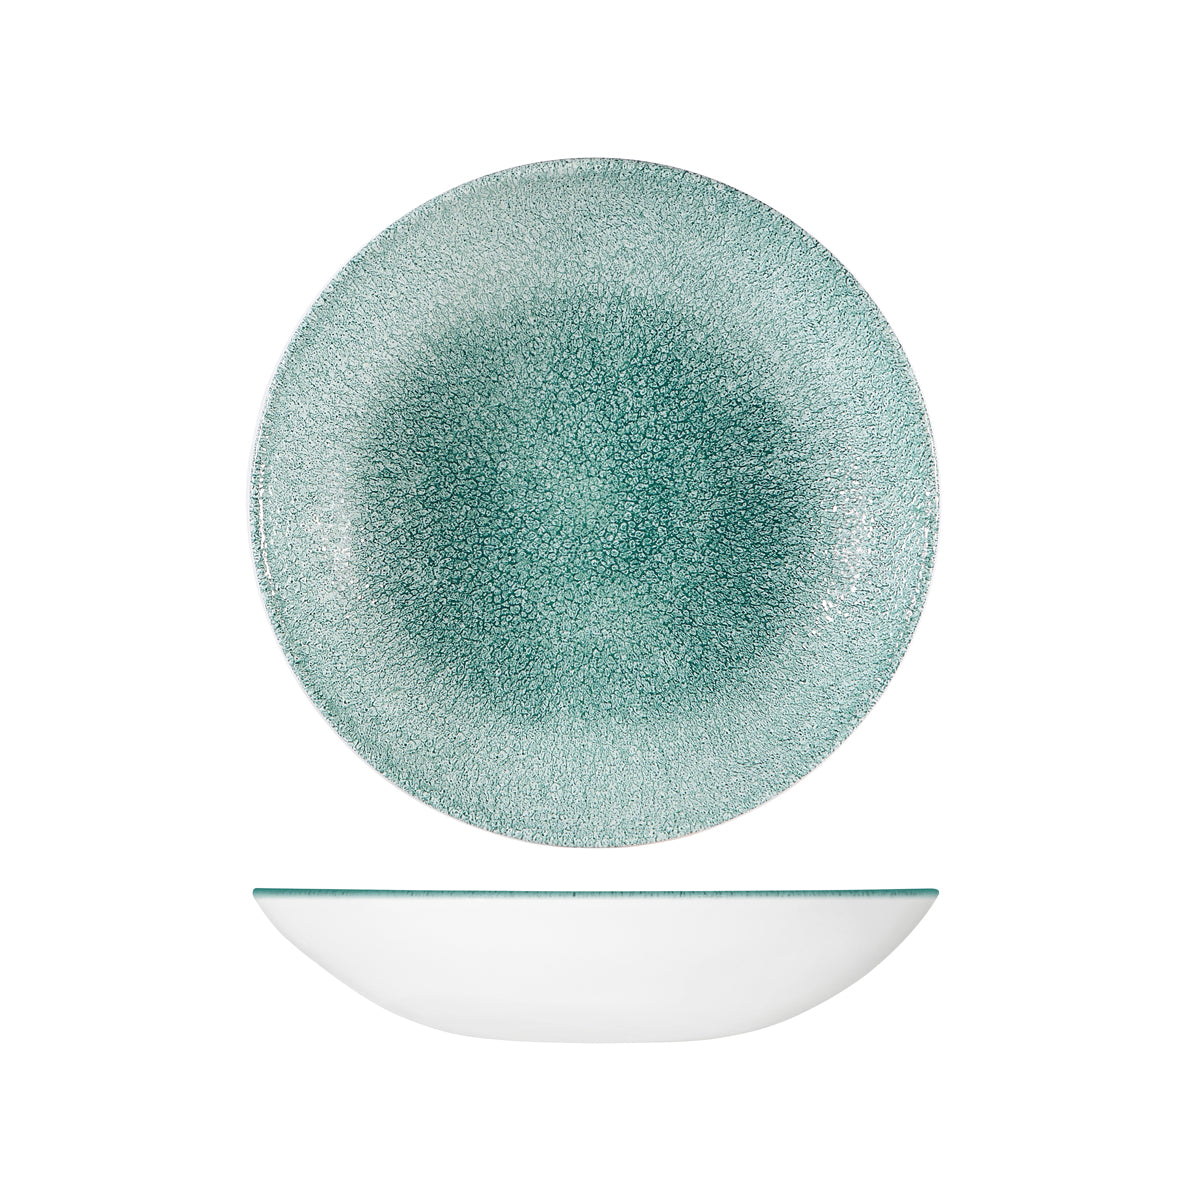 Bowl - Coupe, 1136ml, Raku, Jade Green from Churchill. Textured, made out of Porcelain and sold in boxes of 6. Hospitality quality at wholesale price with The Flying Fork! 